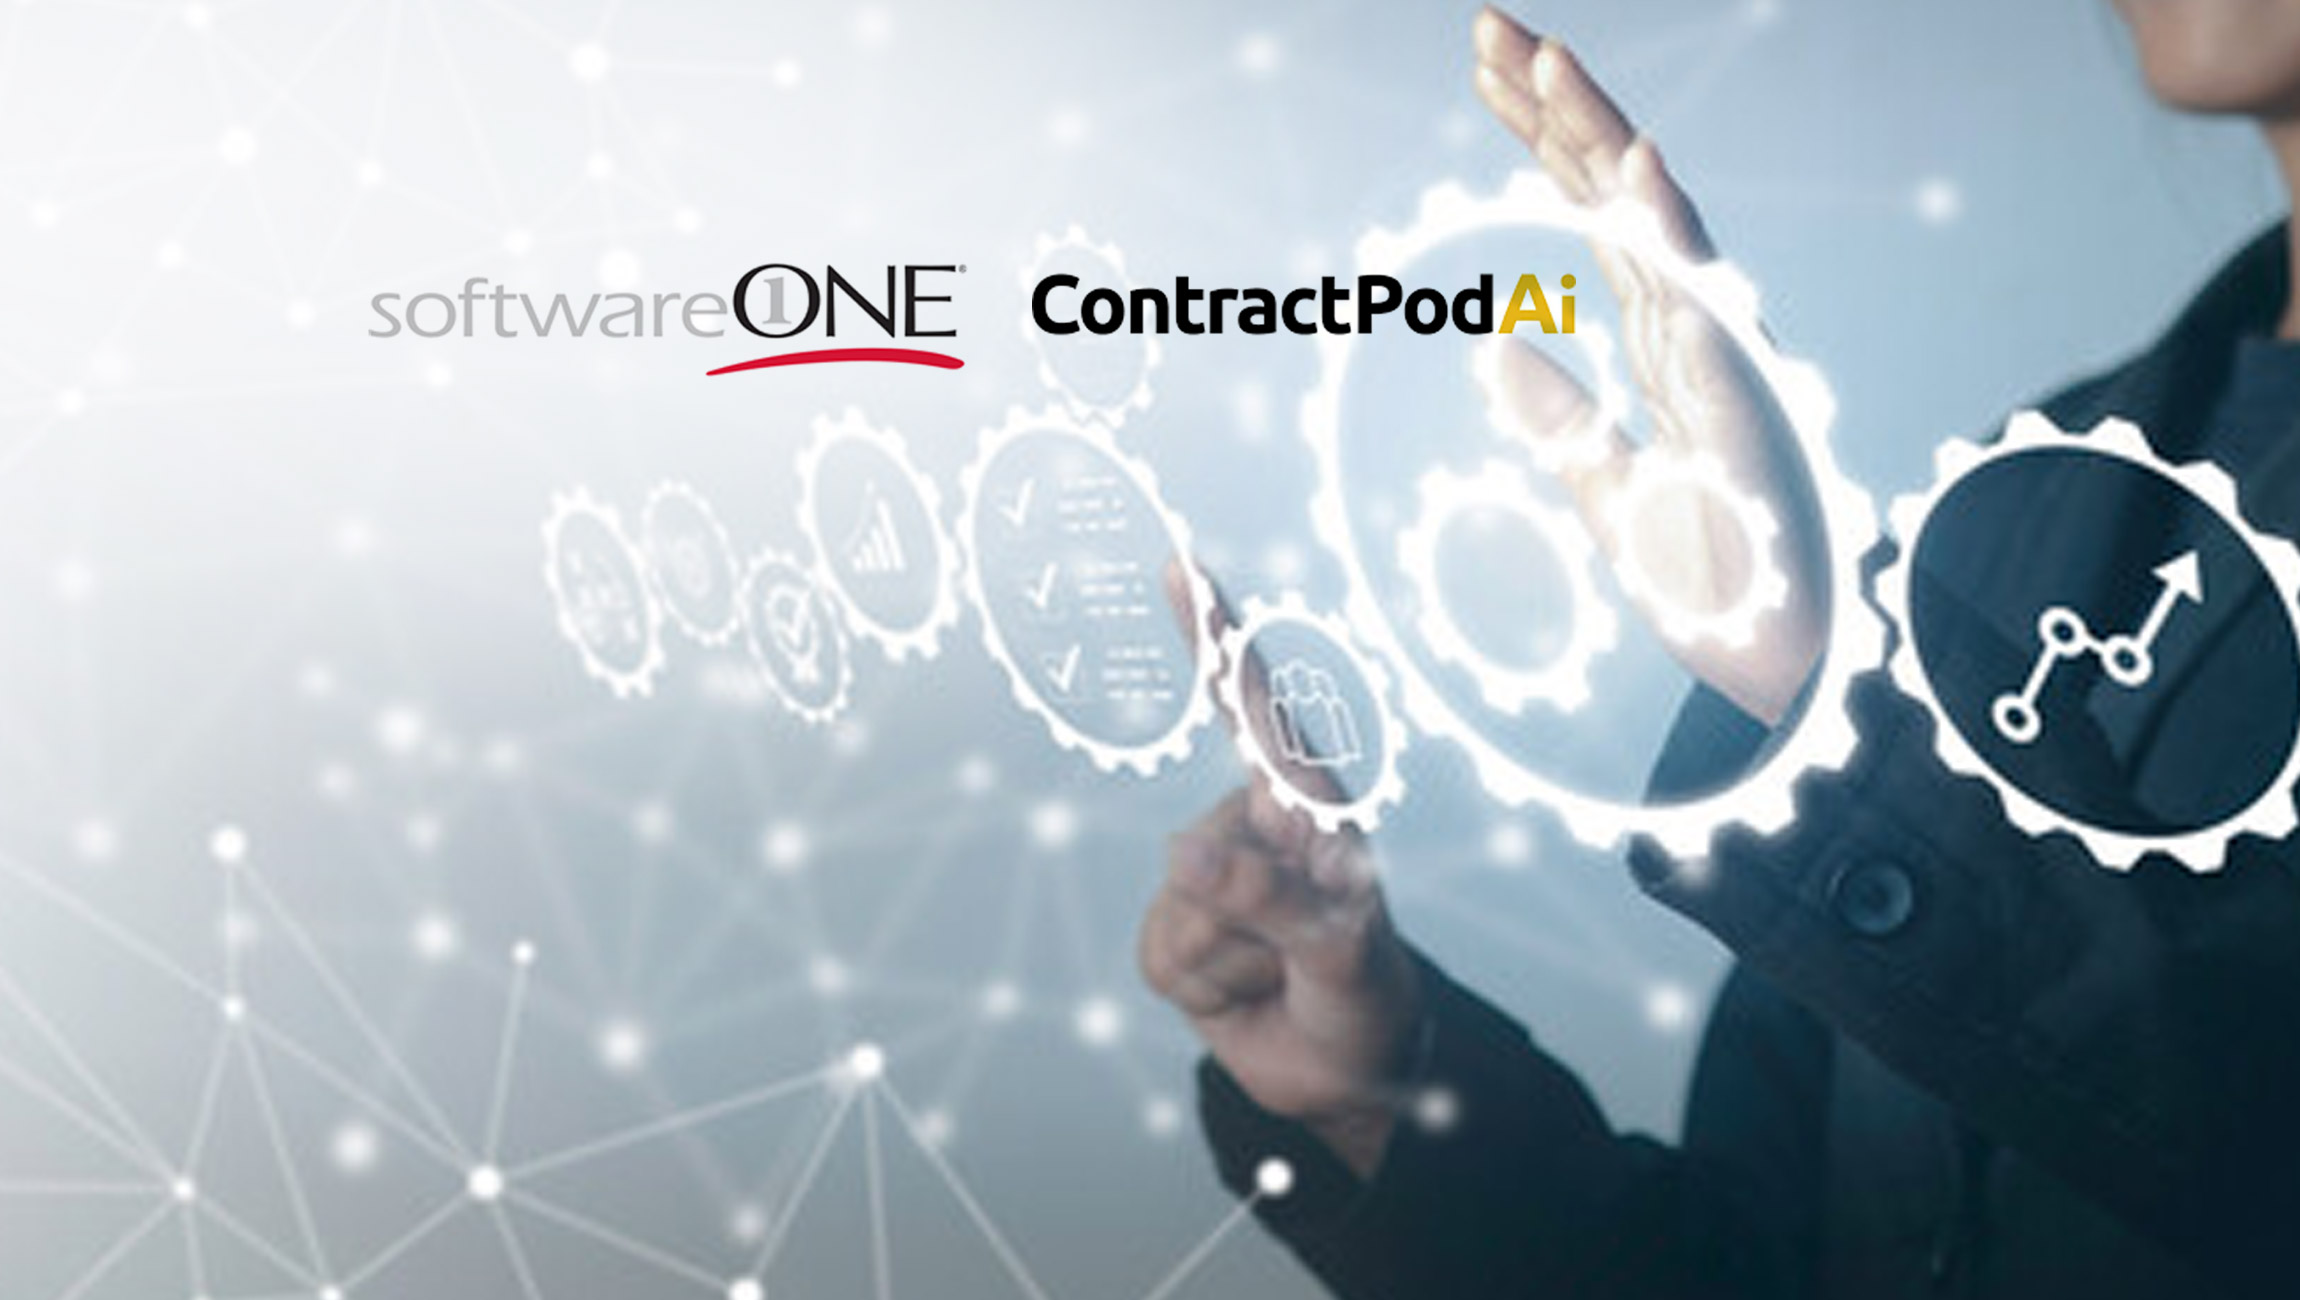 SoftwareONE Selects ContractPodAi to Improve Contract Management Processes